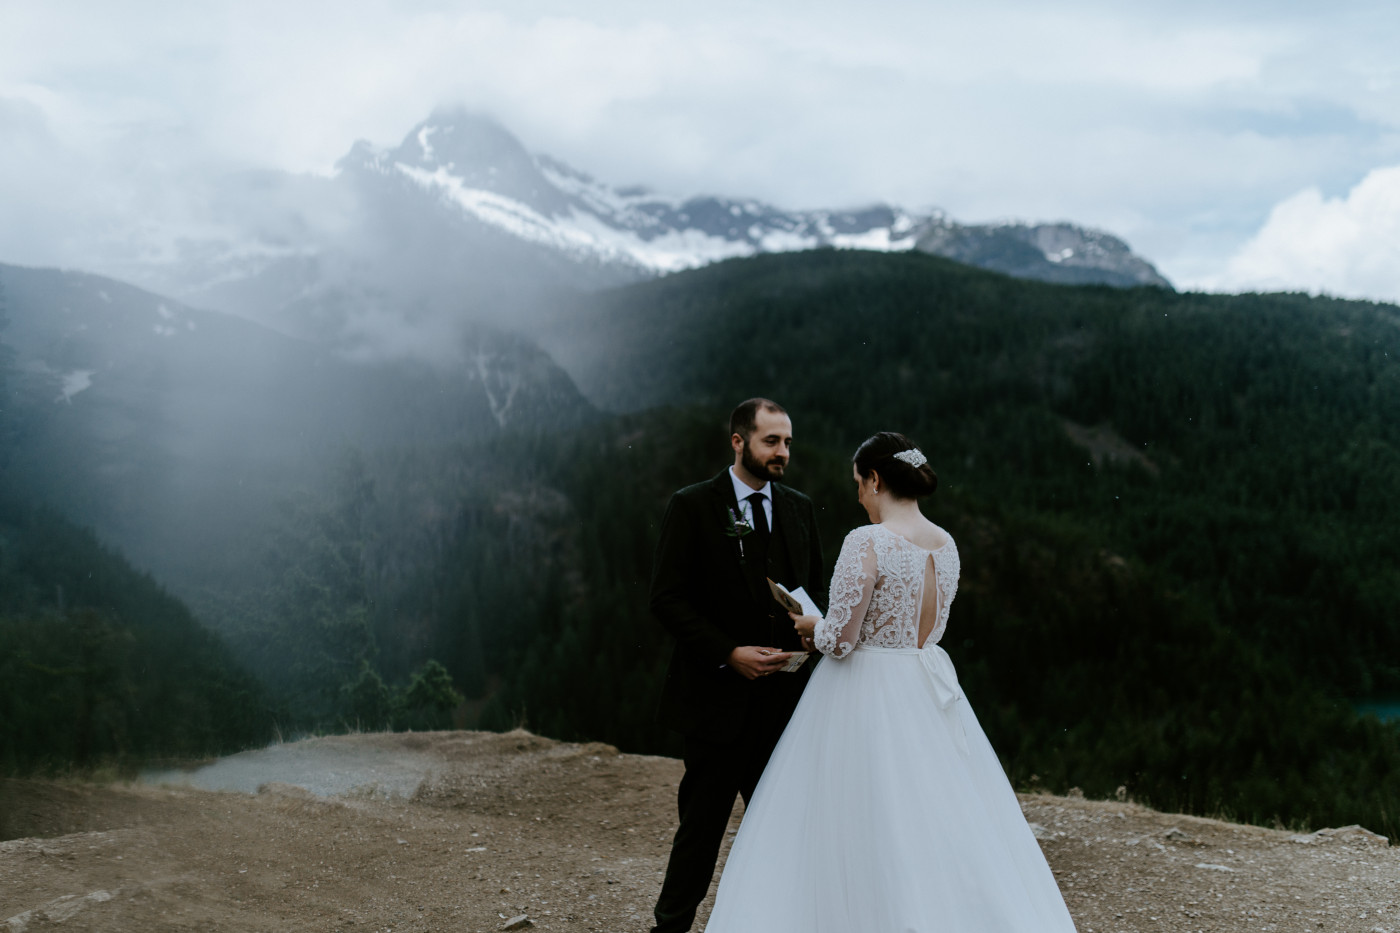 Alex and Elizabeth during their ceremony. Elopement photography at North Cascades National Park by Sienna Plus Josh.